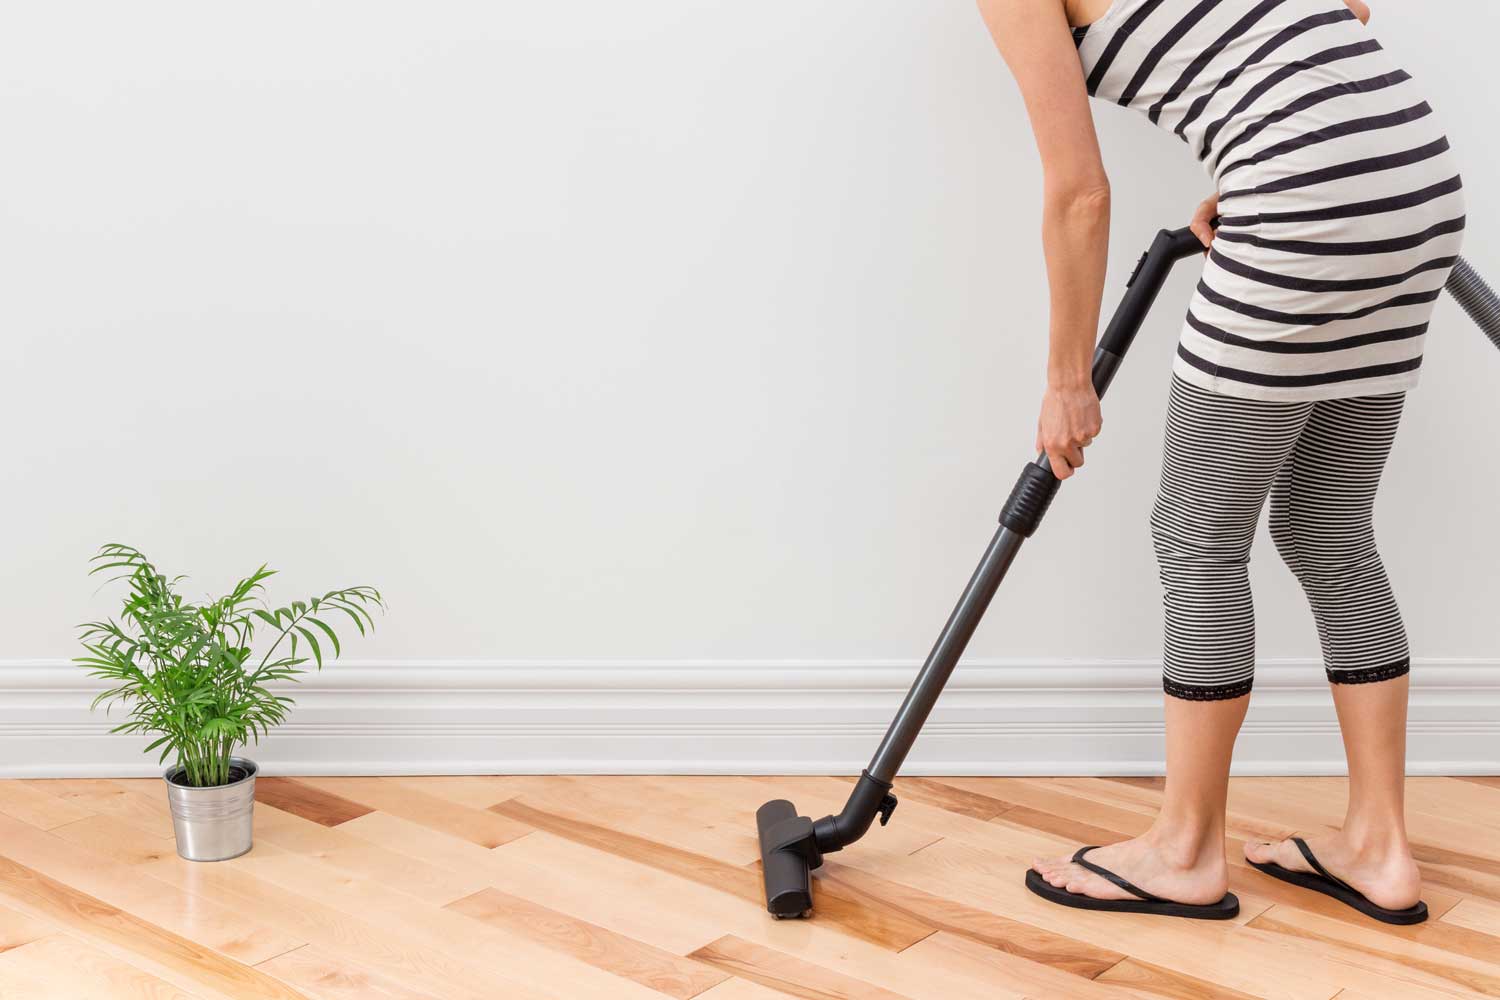 Regulary vacuum or sweep floors to remove dirt and keep your home floors looking amazing - tips from Footprints Floors in Kansas City.